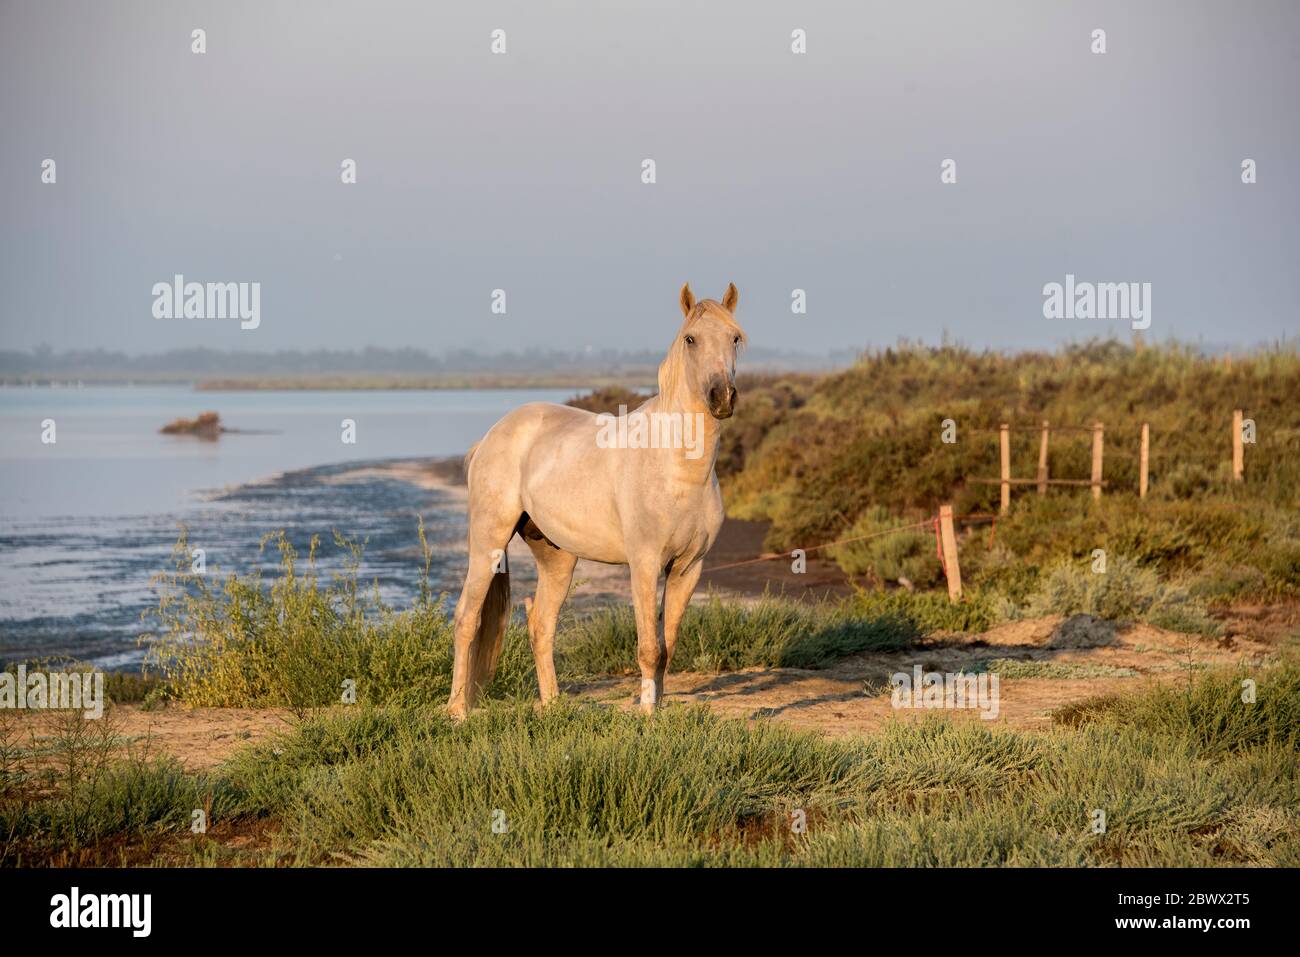 Camargue white horse, South of France Stock Photo